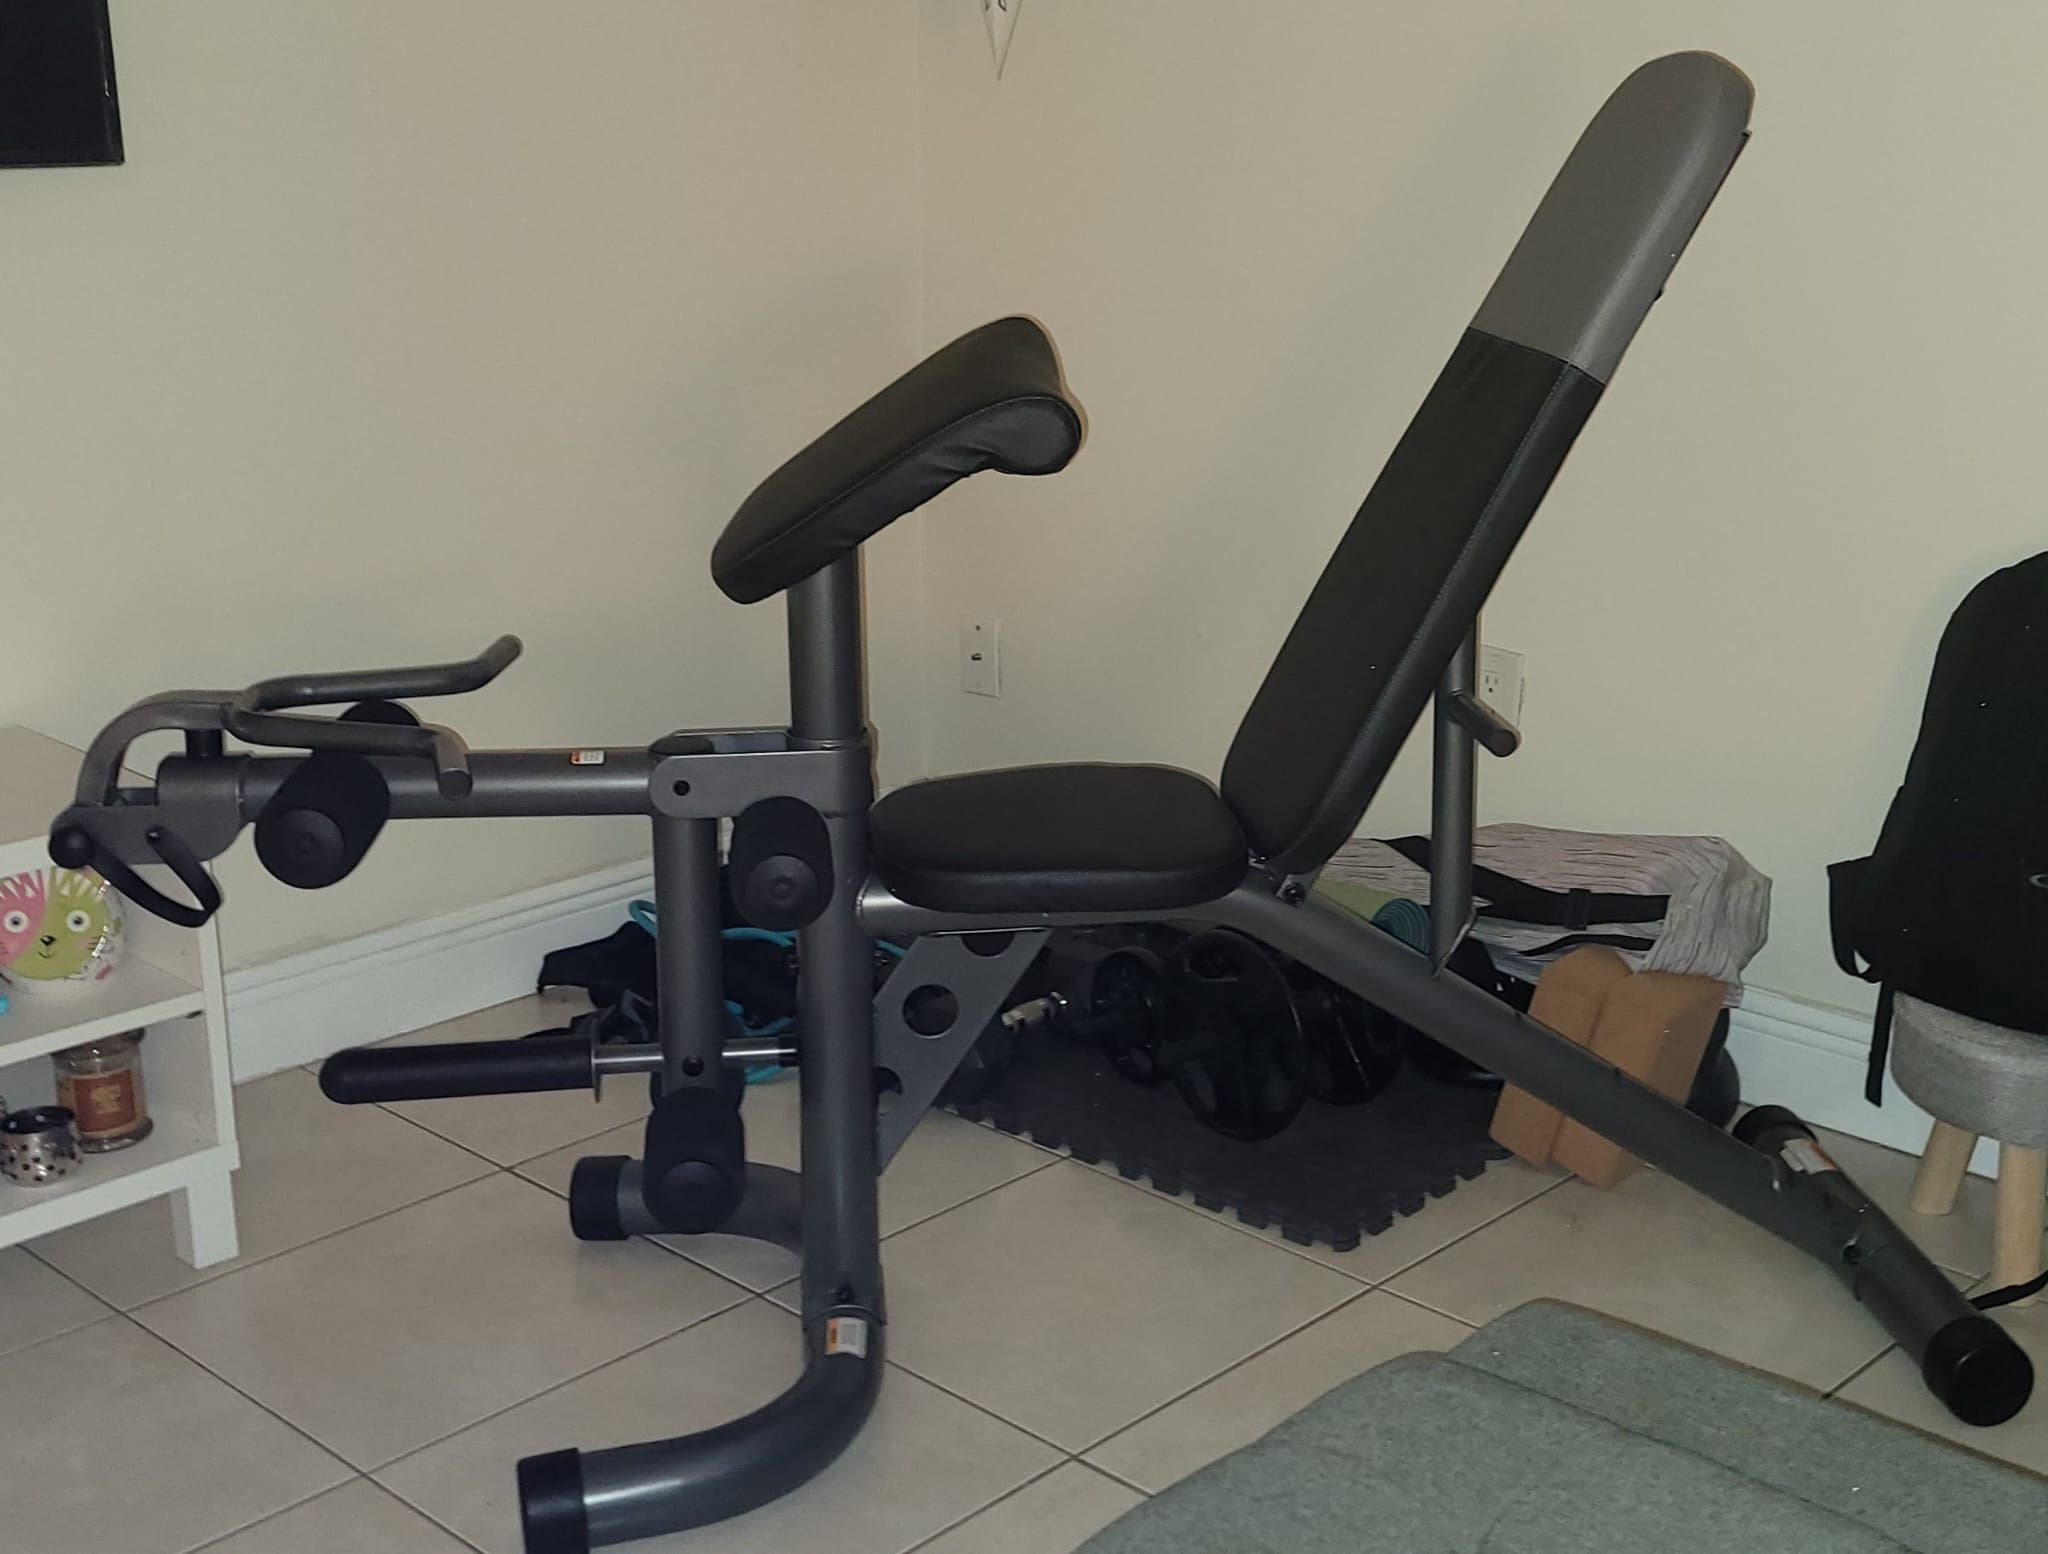 Multifunctional weight bench